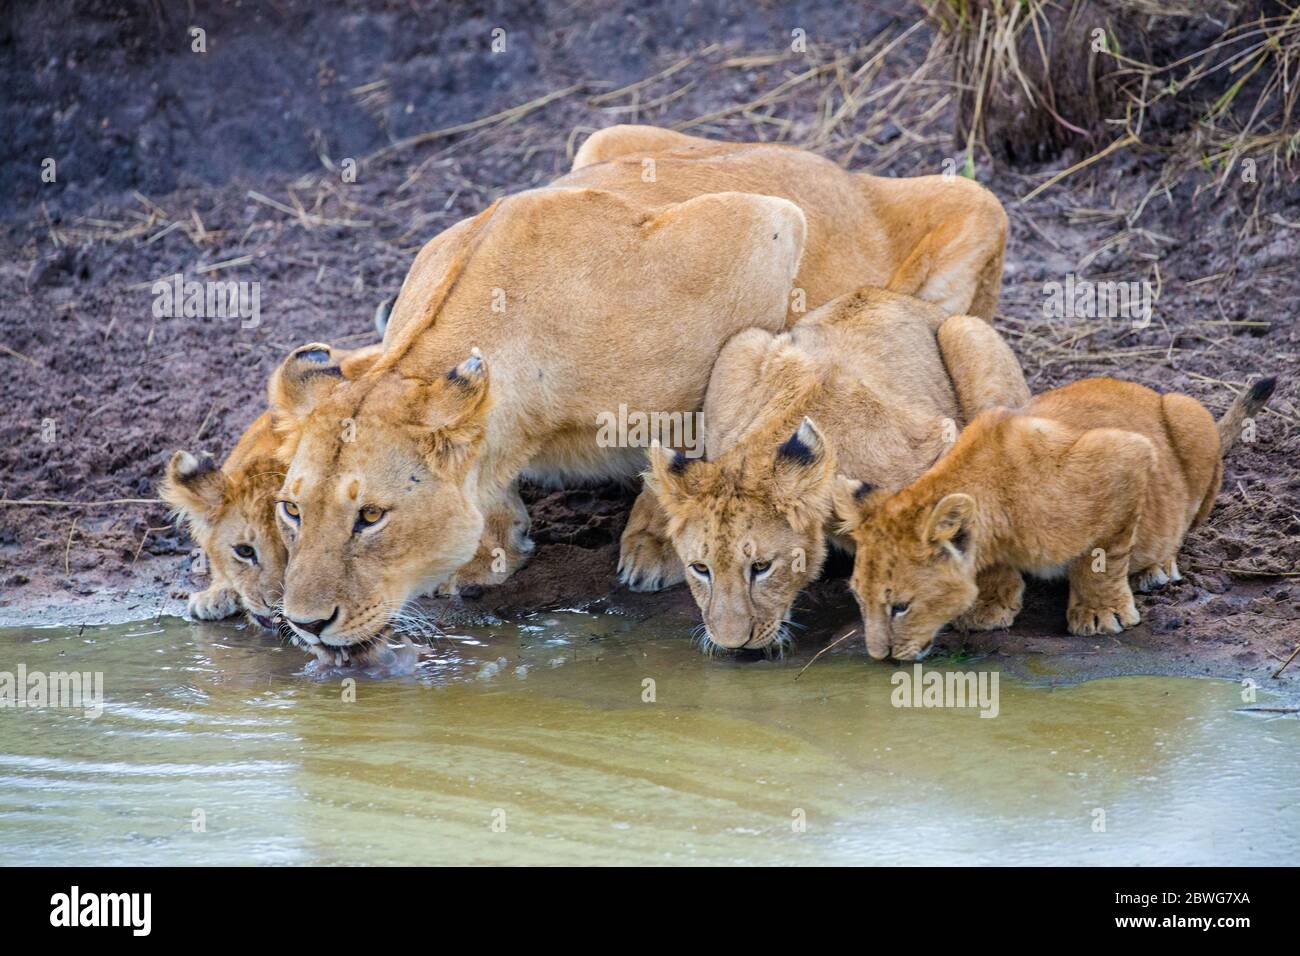 Famille Lion (Panthera leo) crouch Down and podring water, Parc national du Serengeti, Tanzanie, Afrique Banque D'Images